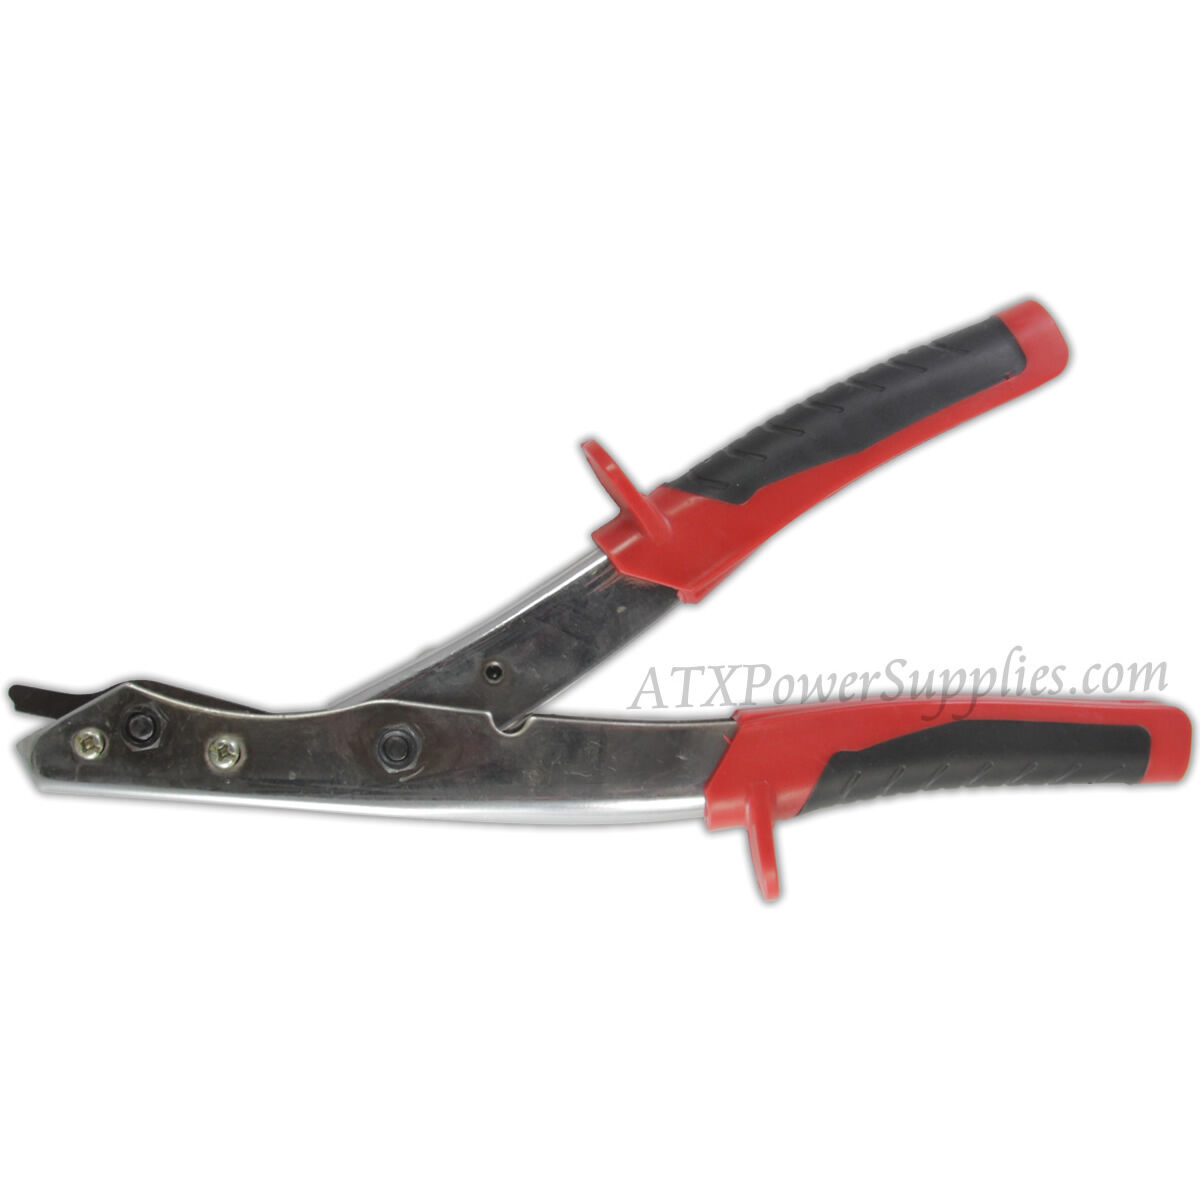 Hand Nibblers Shears Cutters for Sheet Metal Cutting Computer Case Modding Mods